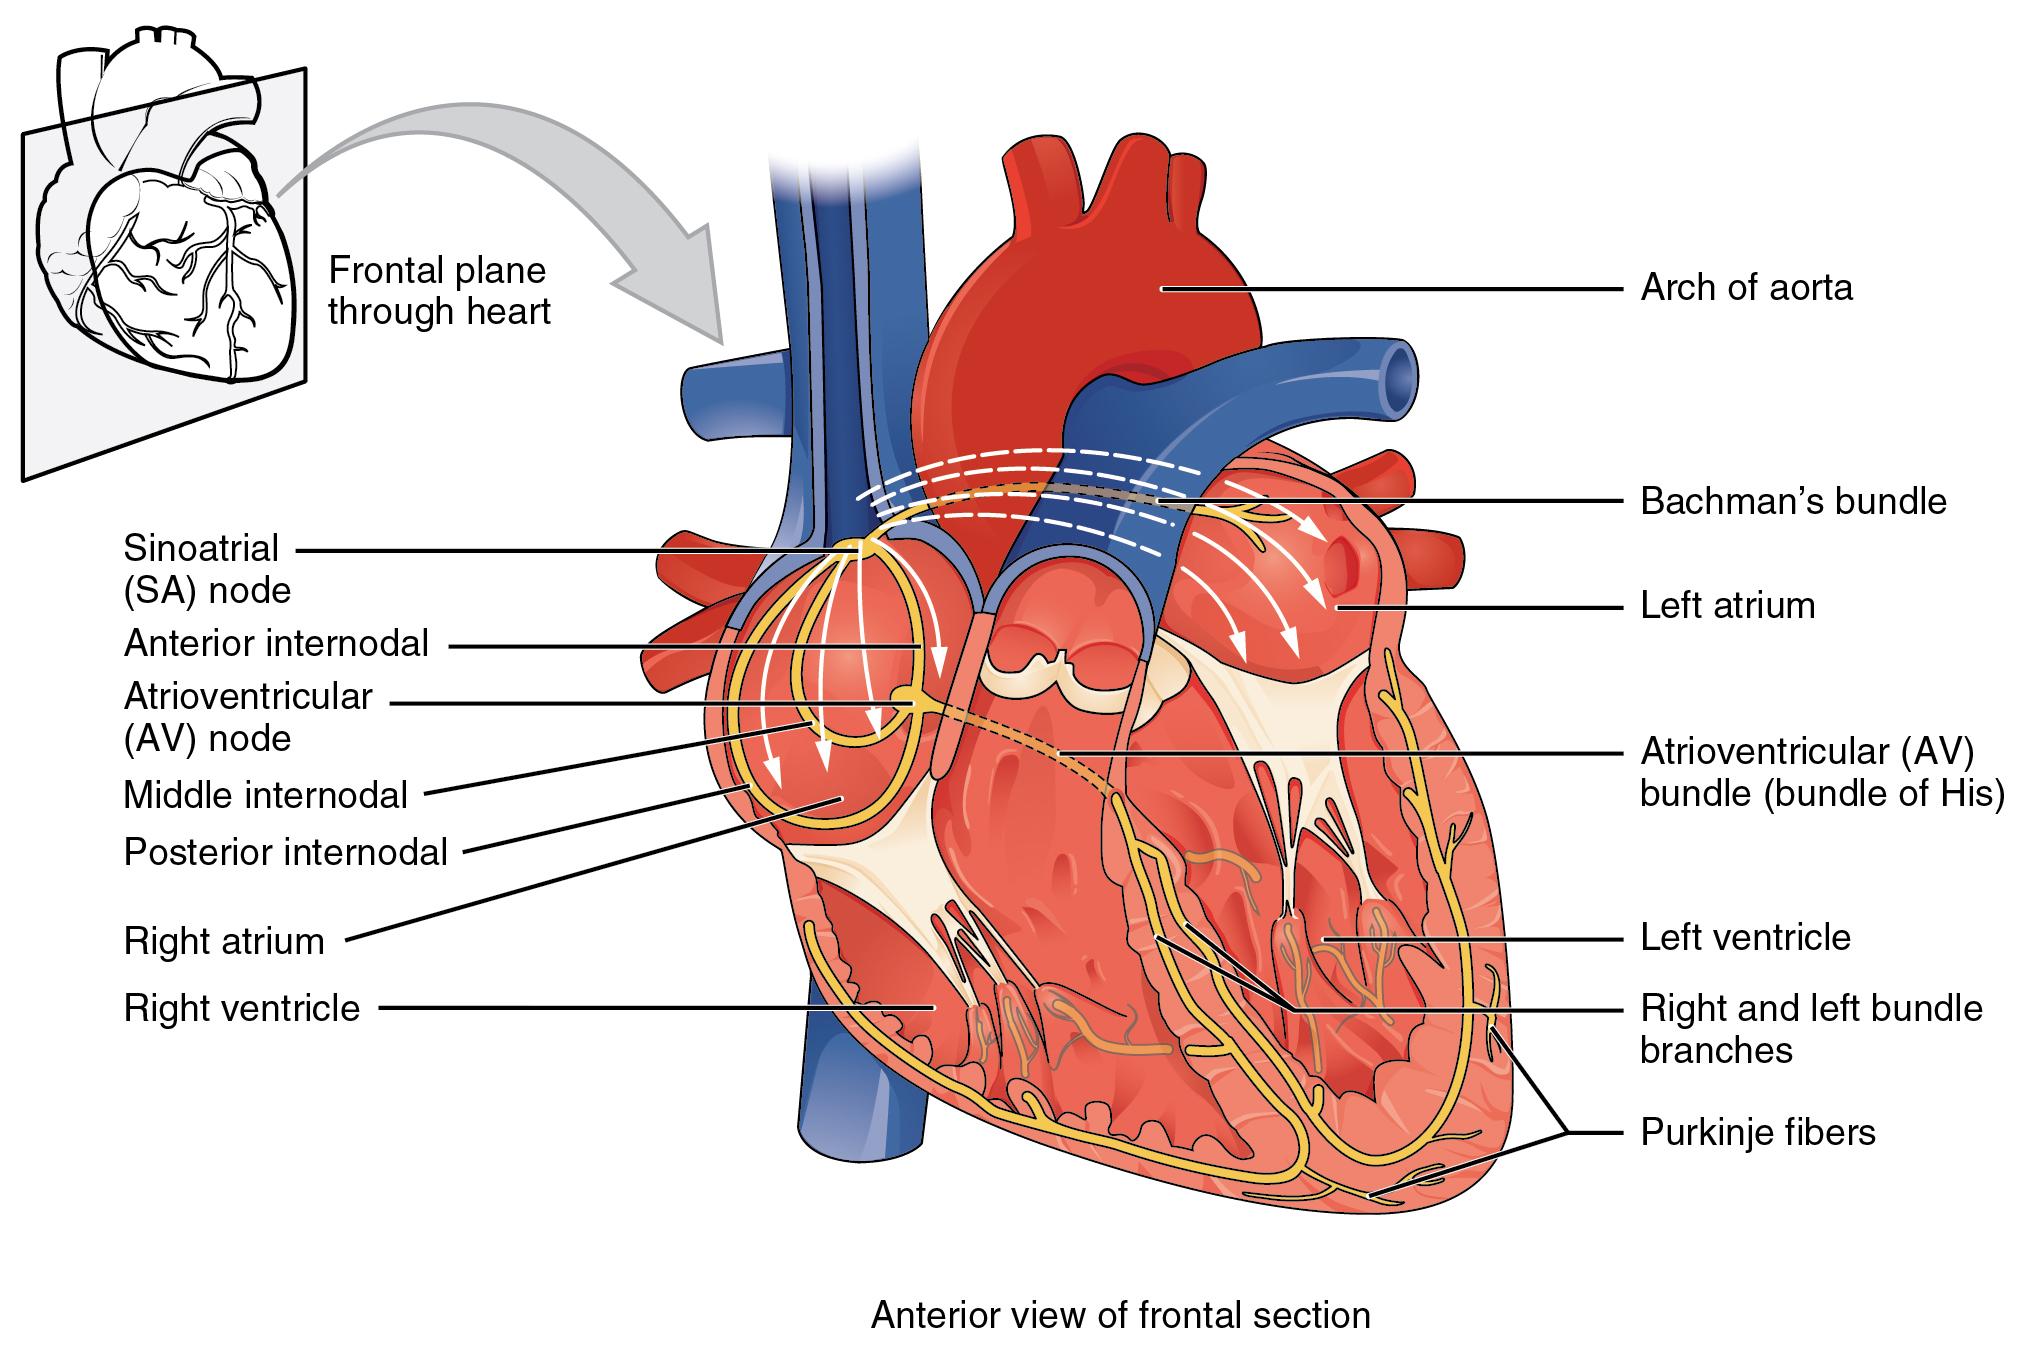 Illustration of human heart from anterior view of frontal section with labels for major areas. Also has small inset illustration of frontal plane through heart.